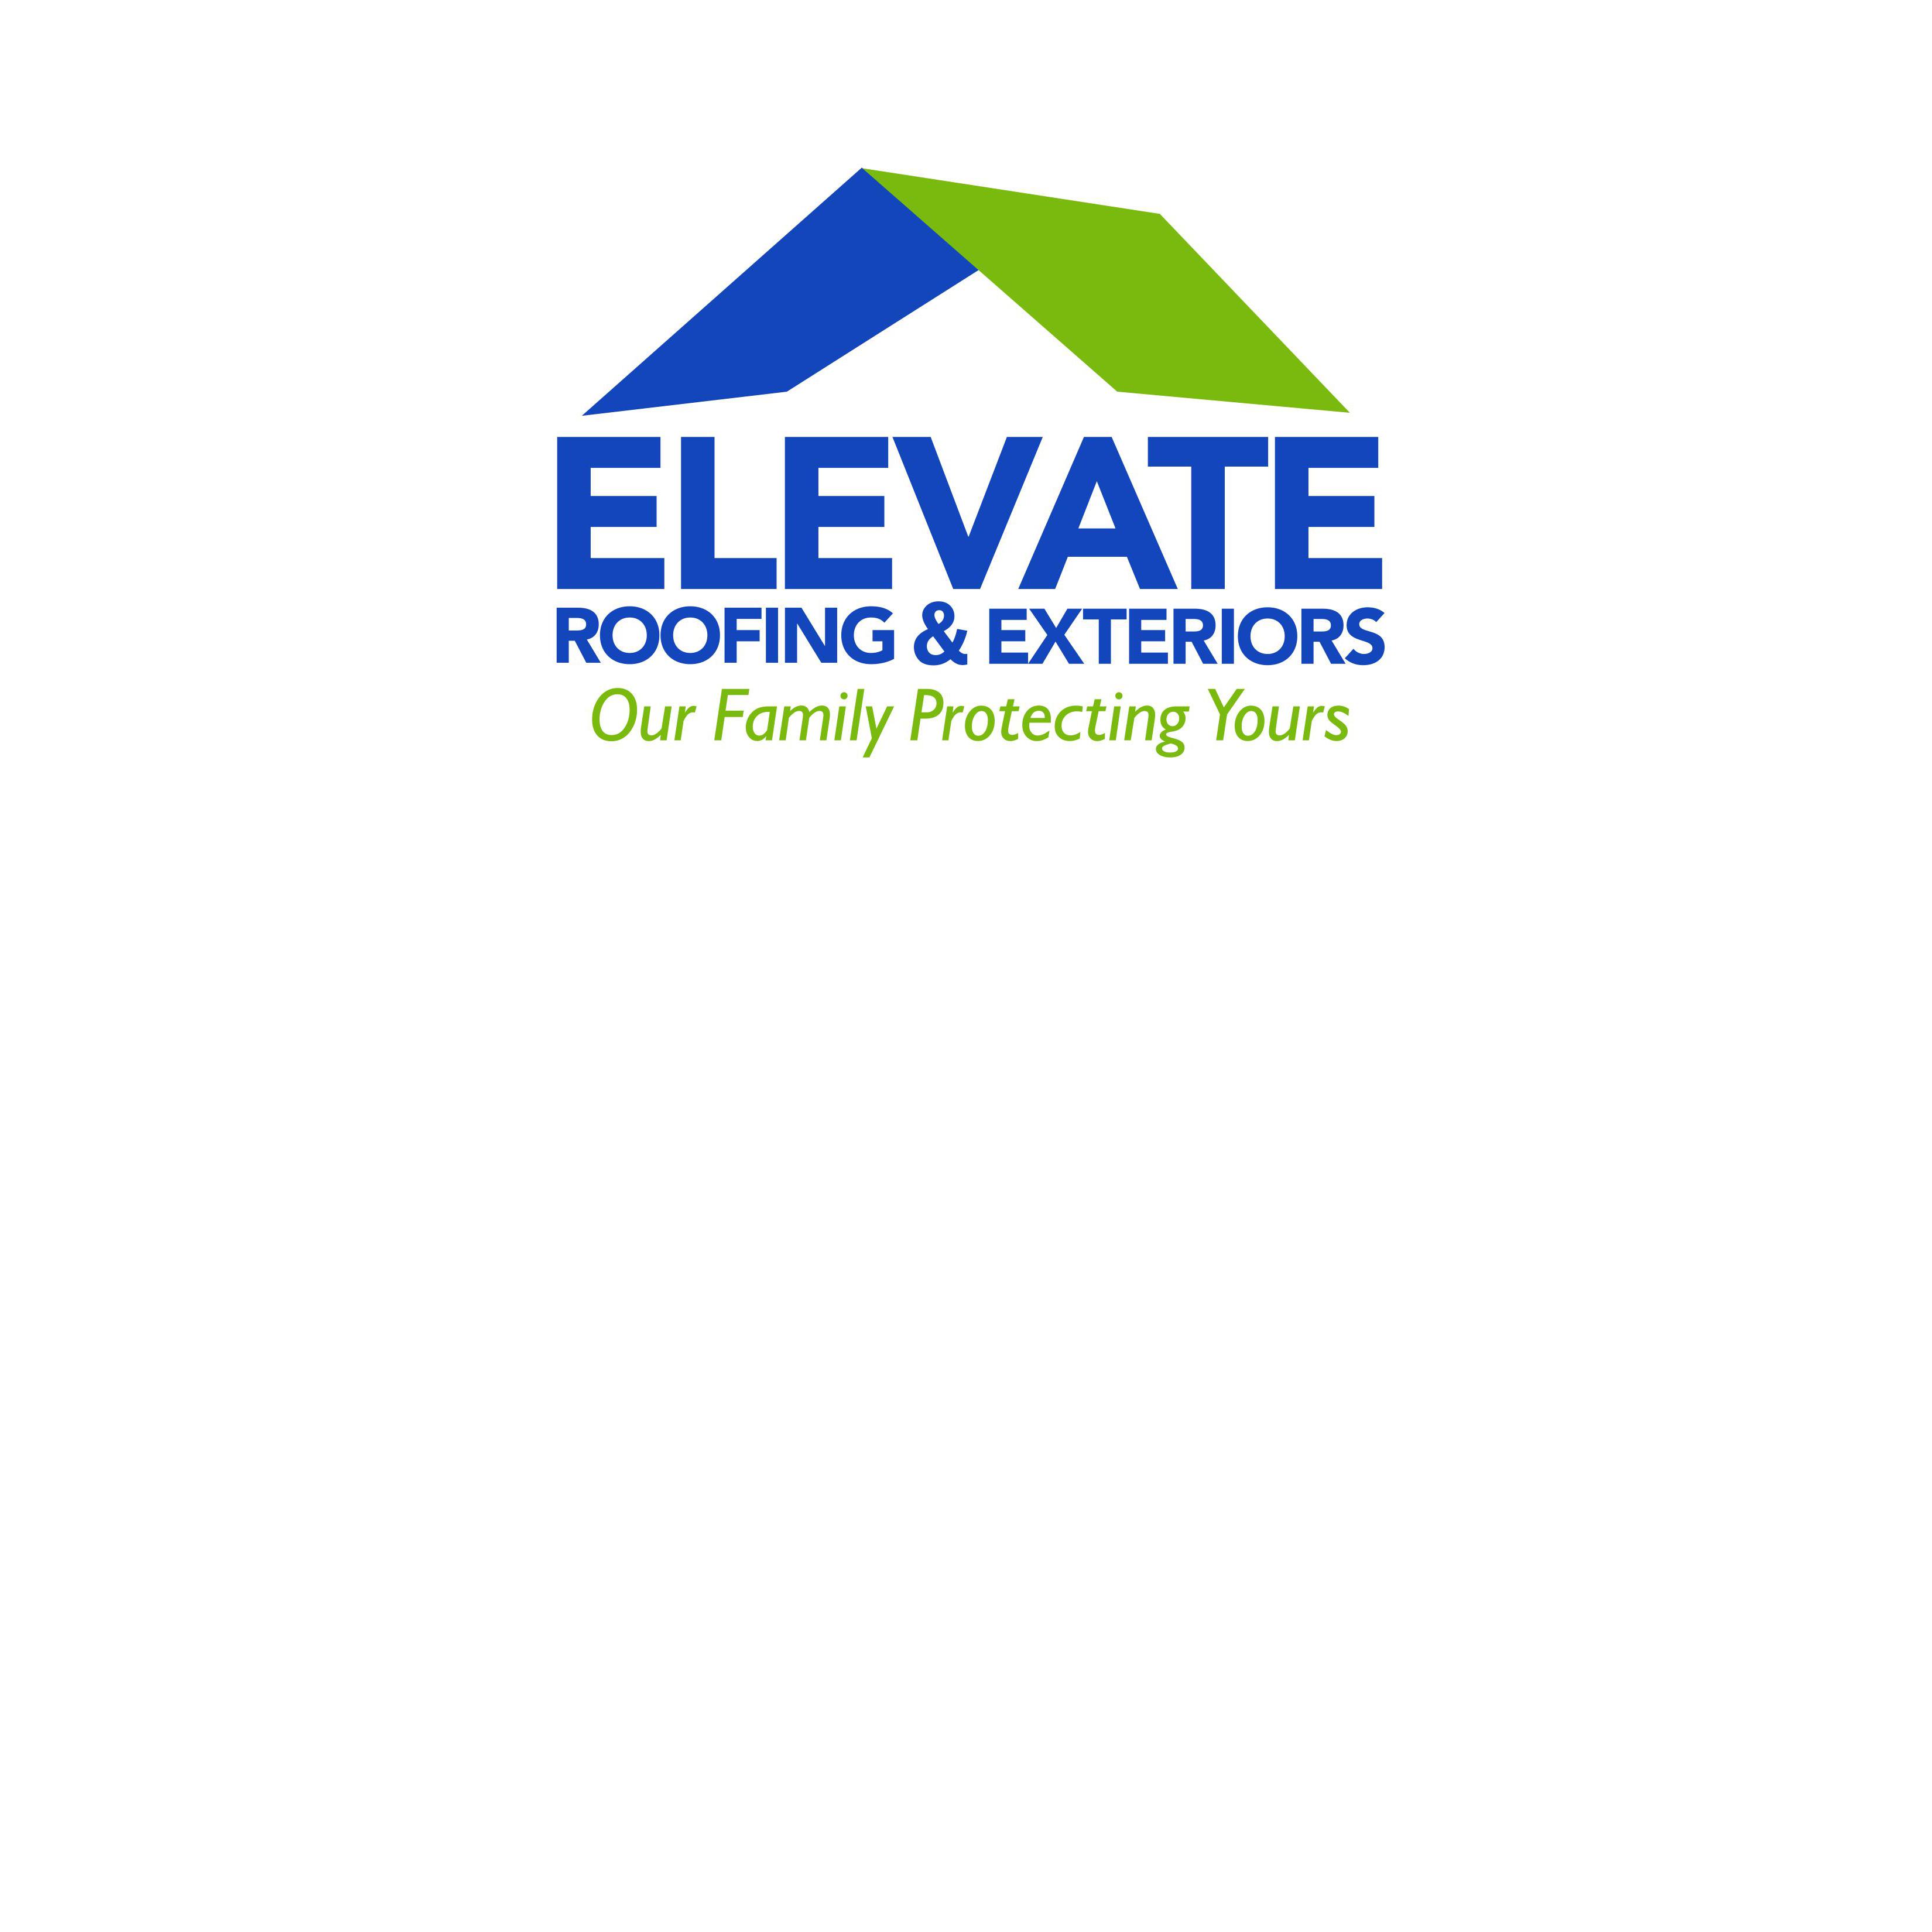 Elevate Roofing and Exteriors Logo